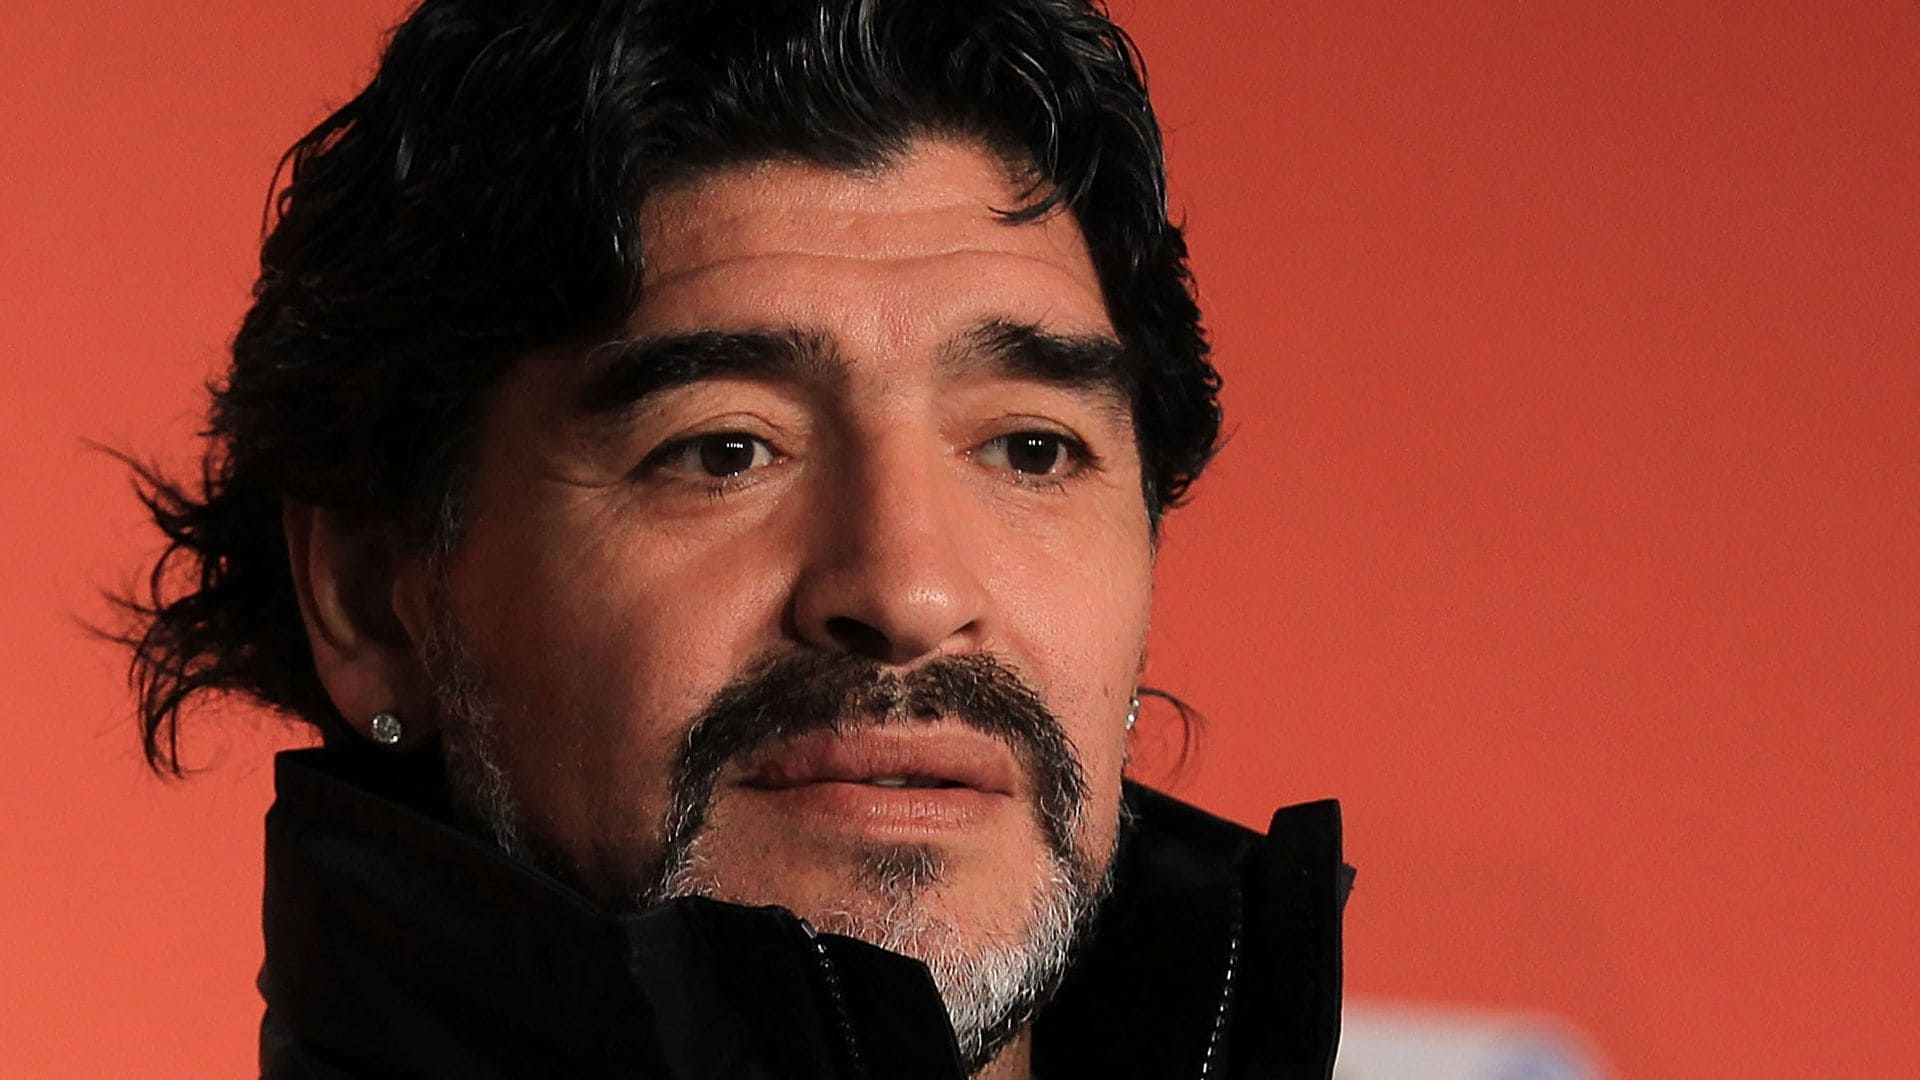 Diego Maradona's daughter revealed she spoke to her dad through a medium; 'It was very beautiful'